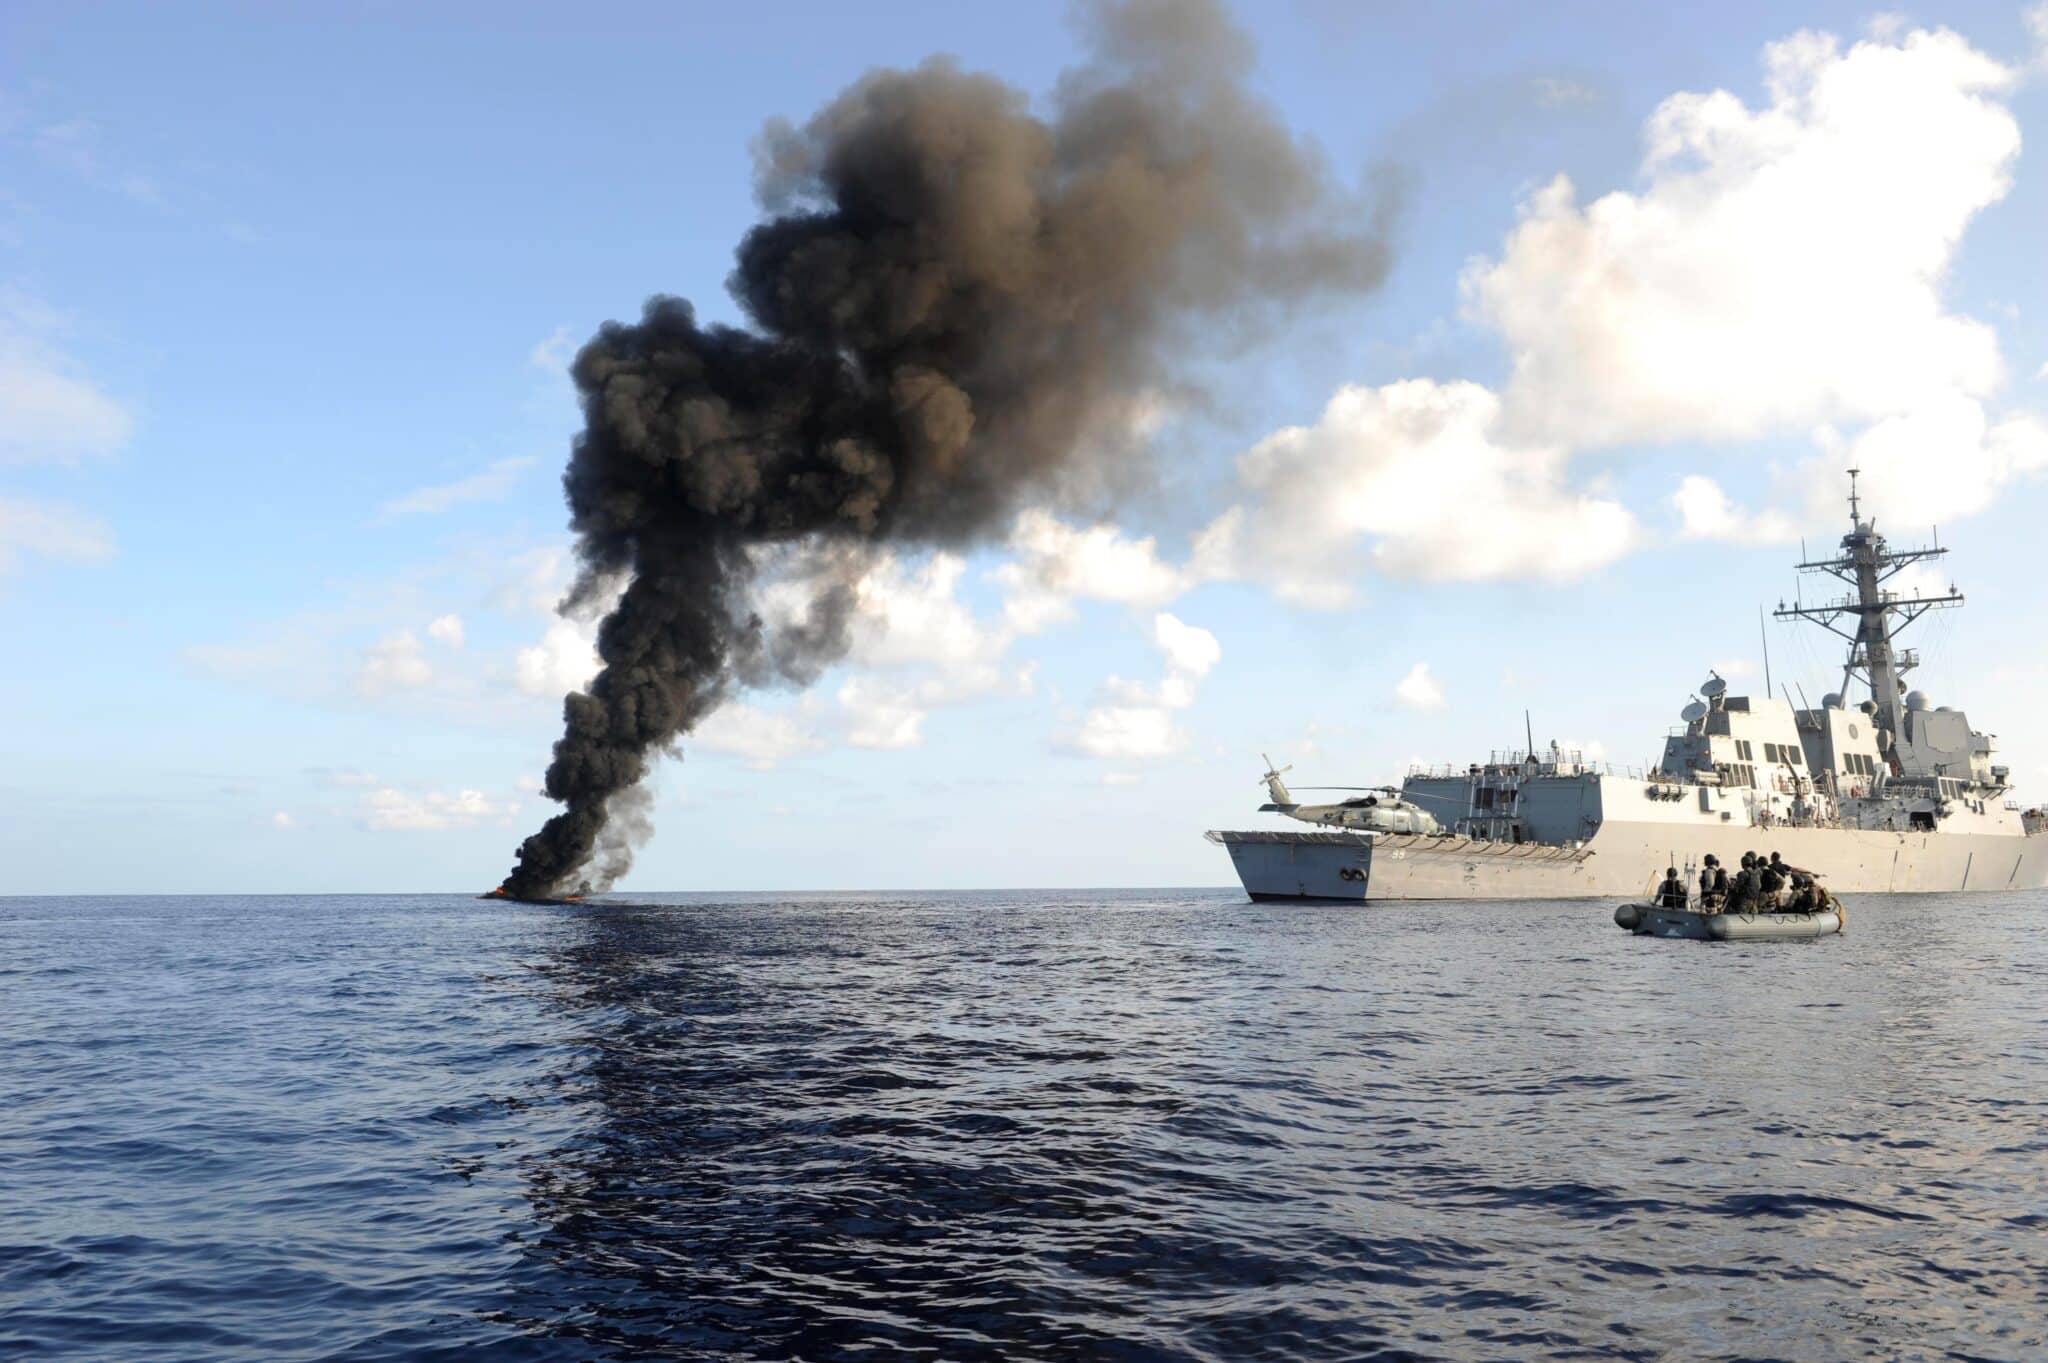 USS Mason (DDG-87) came under AShM attack in the Read Sea. 2 missiles launched from Houthi ...